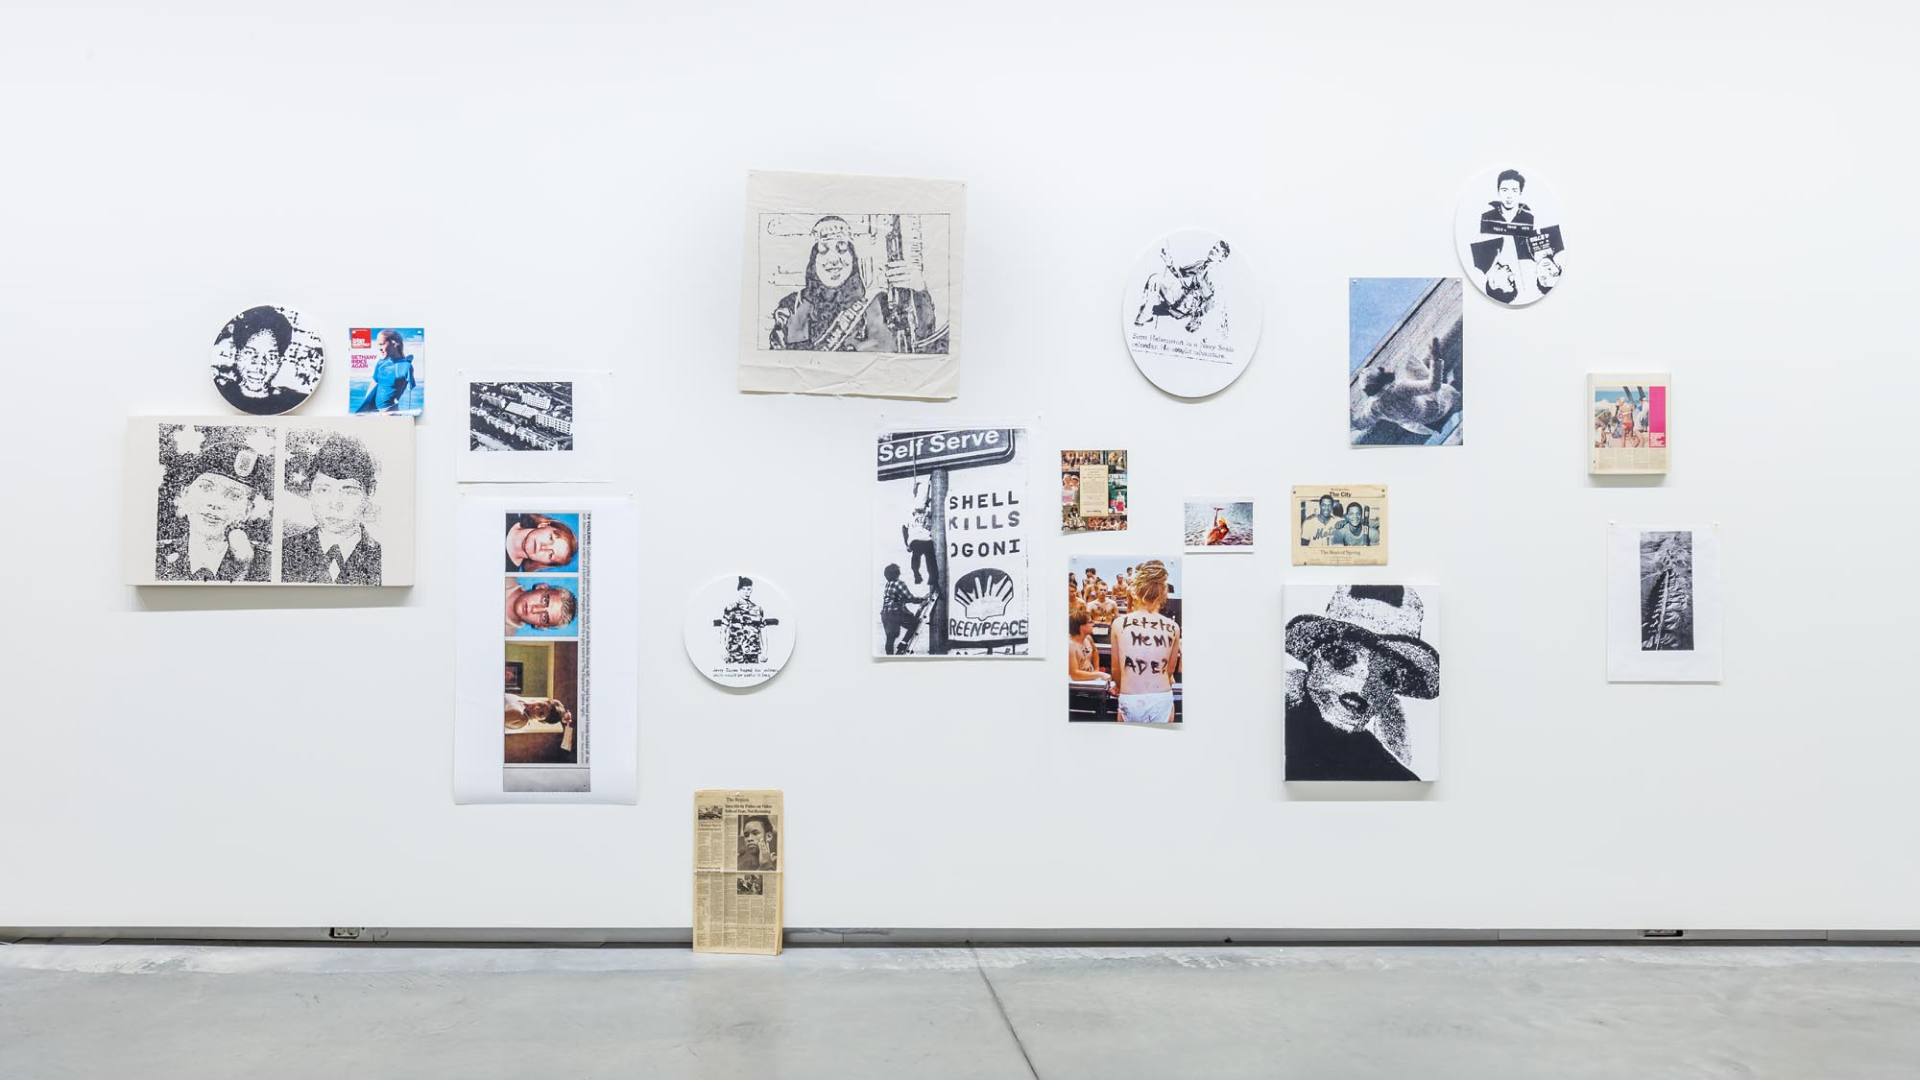 Installation view of the exhibition, Nate Lowman, at Astrup Fearnley Museet in Oslo, dated 2018.